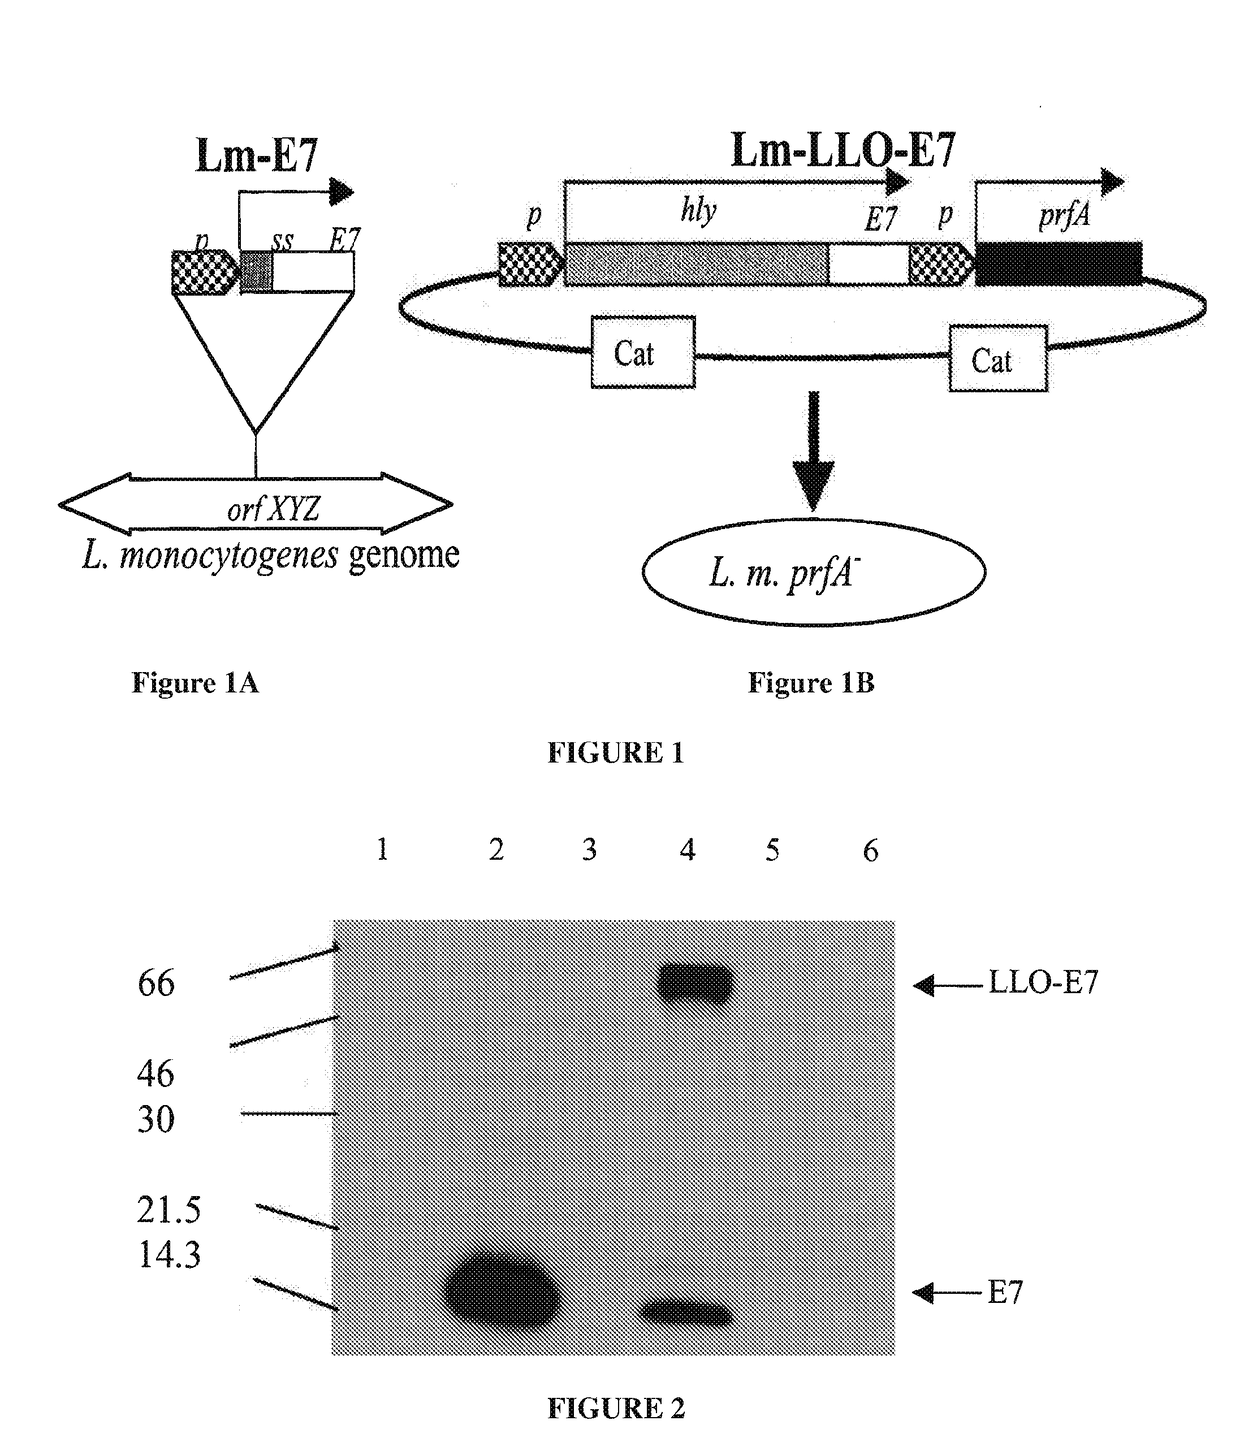 Manufacturing device and process for personalized delivery vector-based immunotherapy